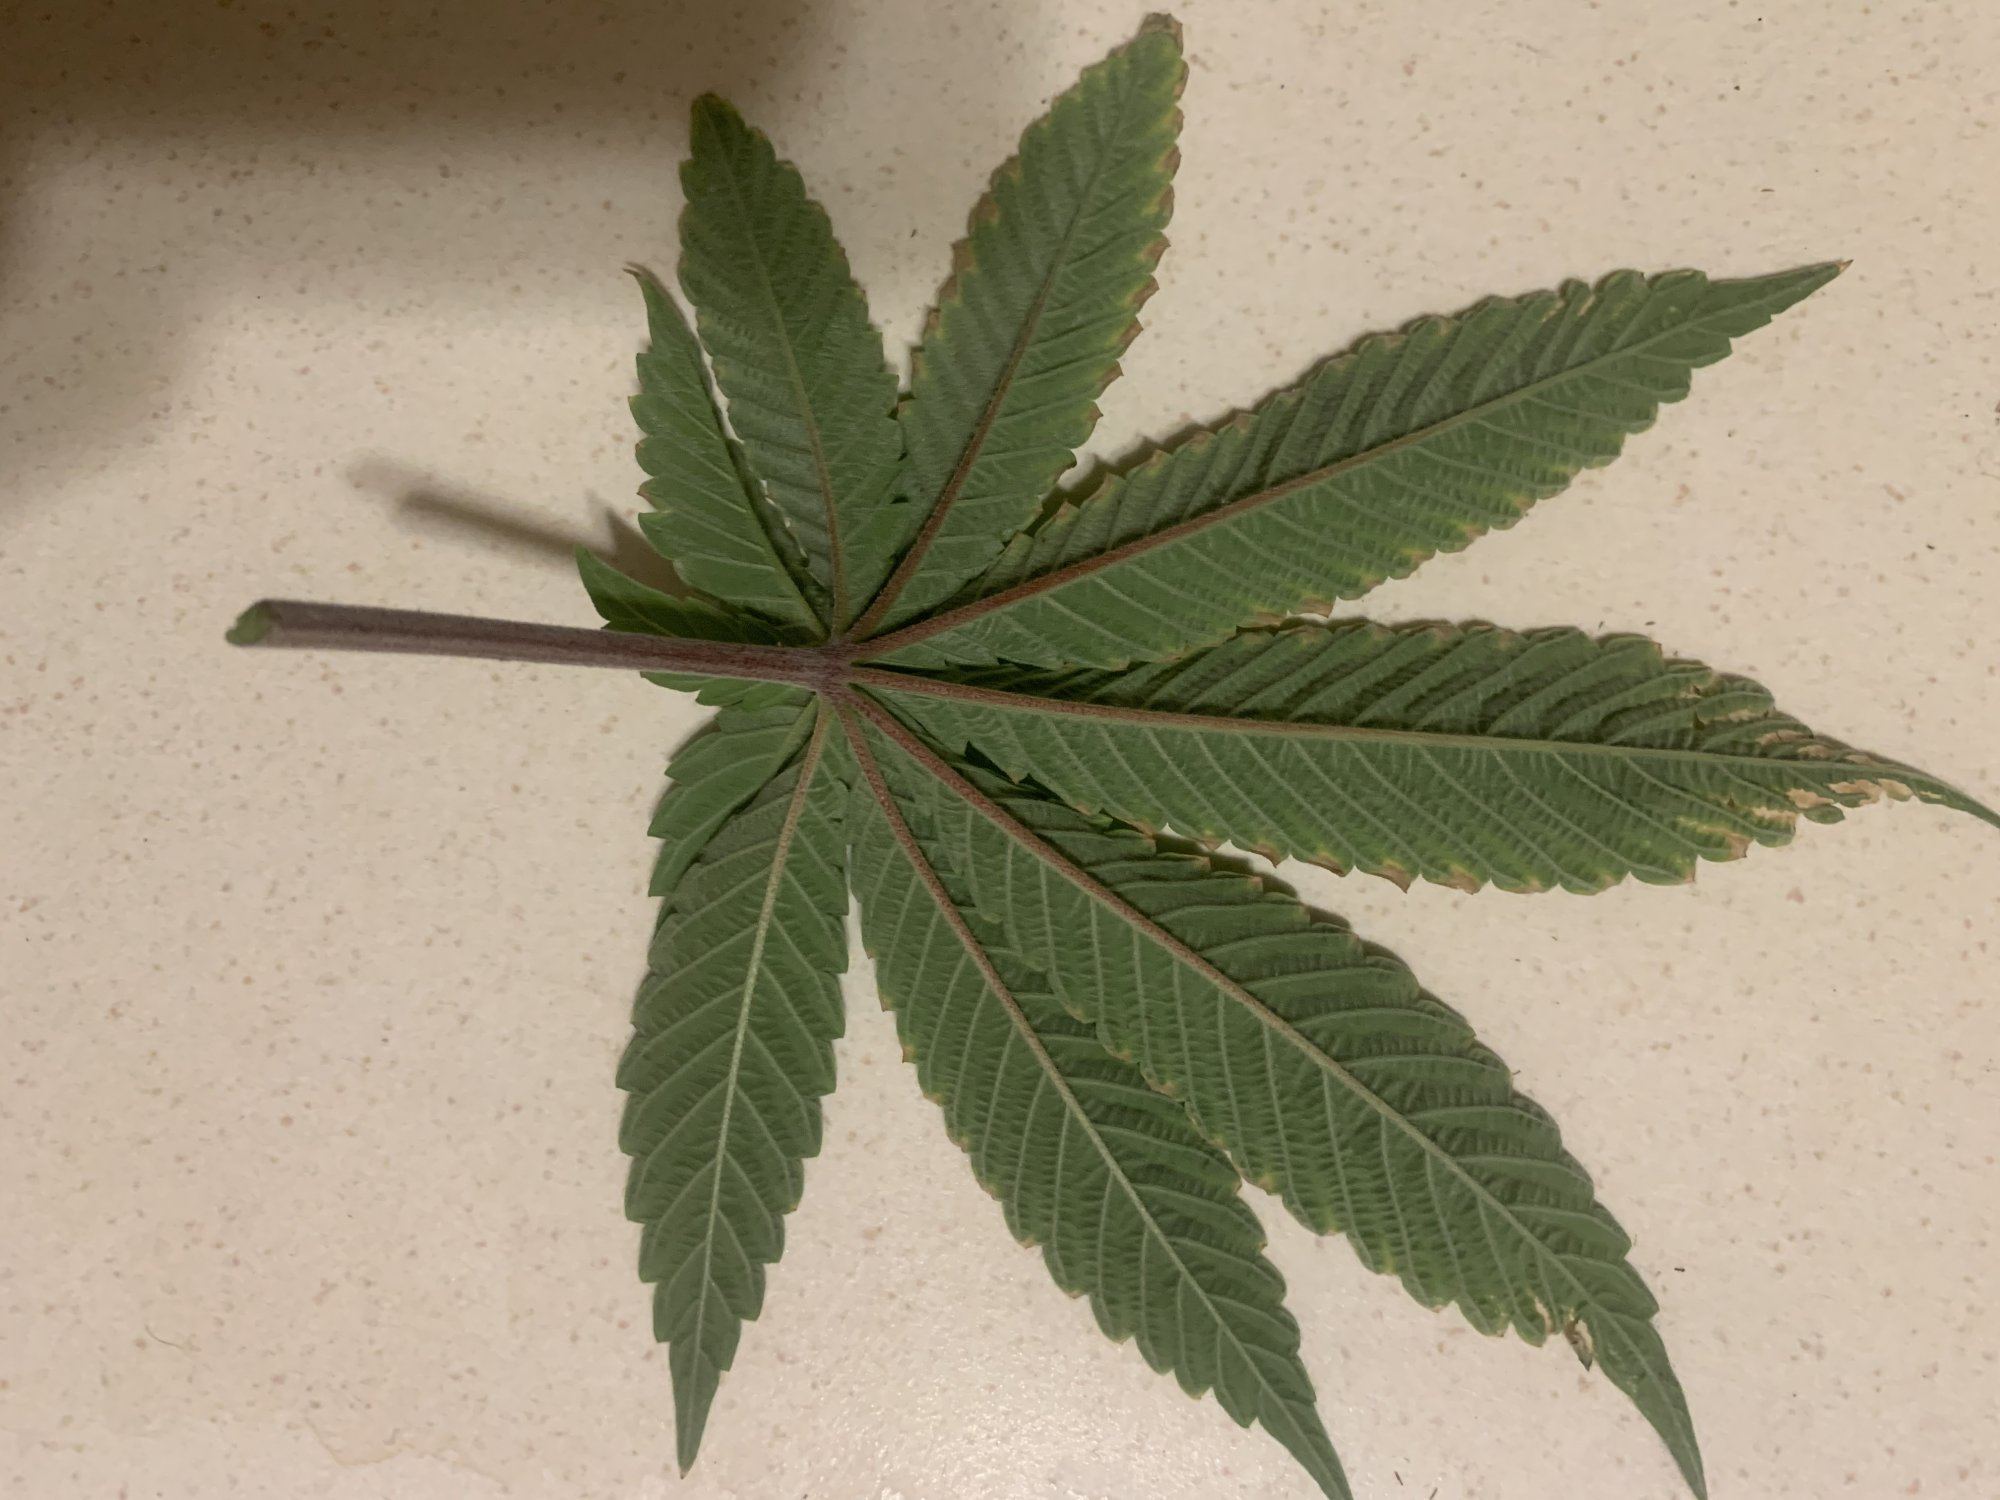 Leafs show signs of deficiency 3